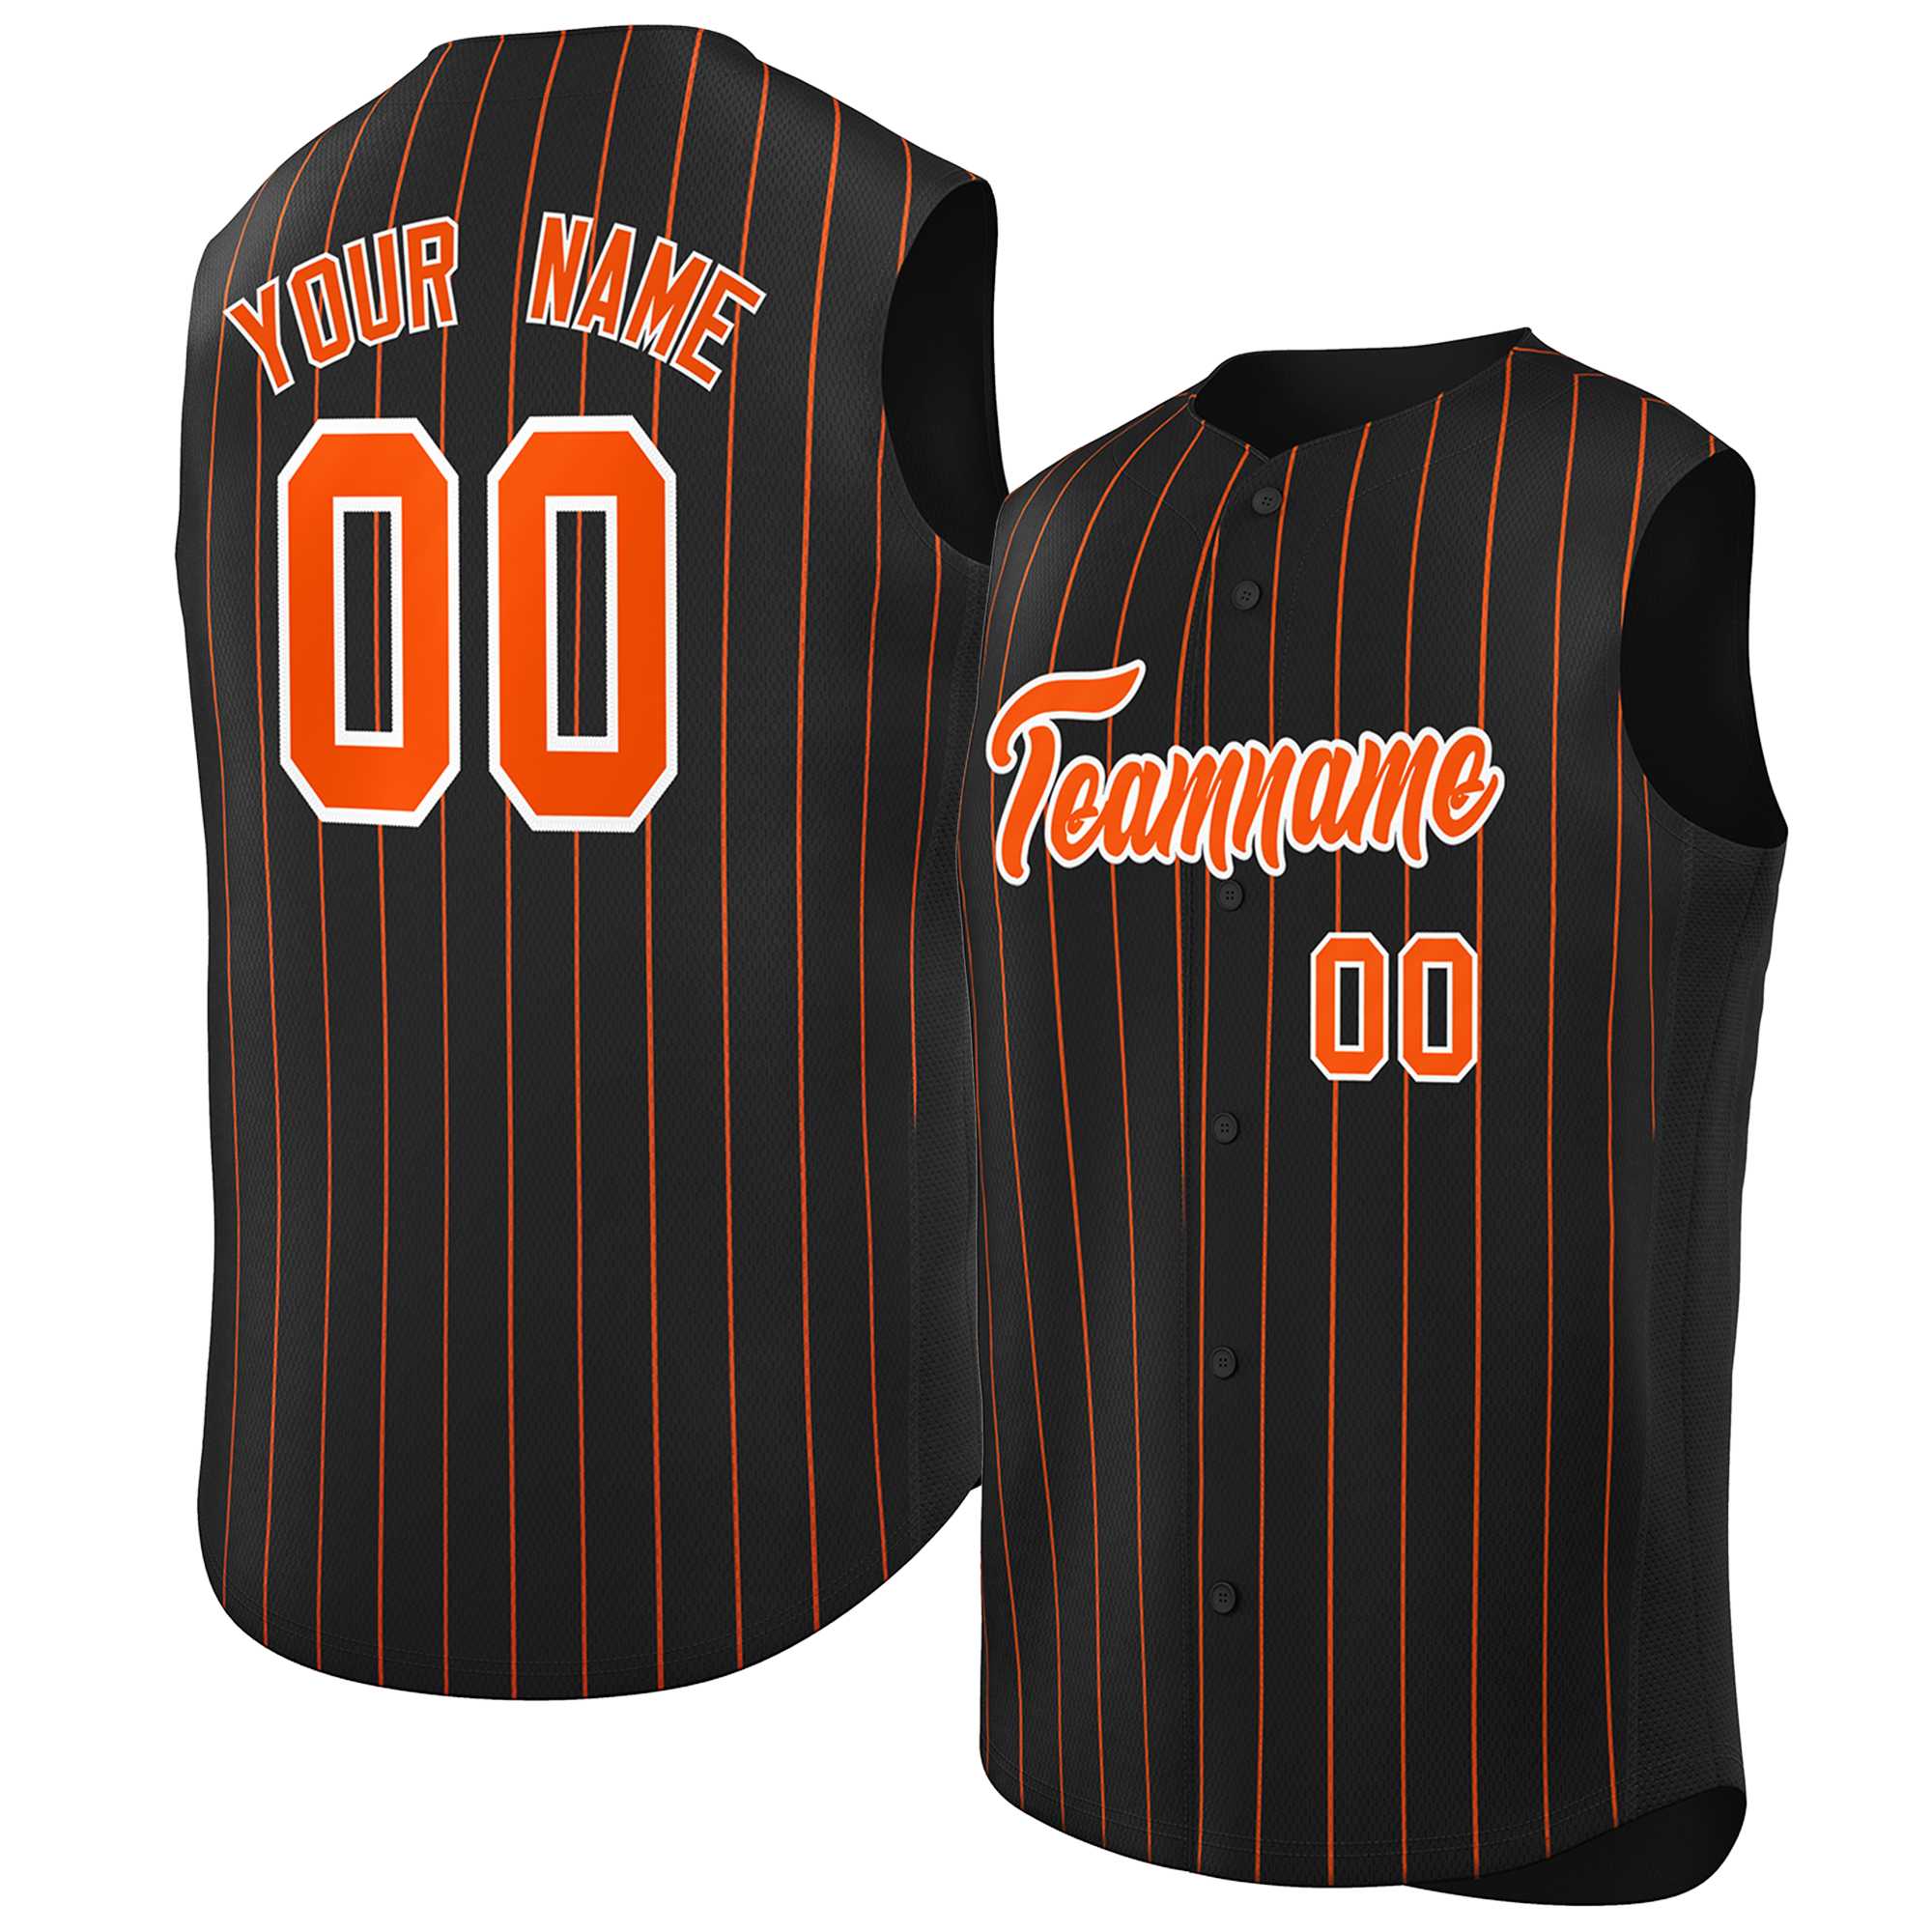 Custom Pinstriped Sleeveless Baseball Jersey| Personalized Jersey with Your Team, Player, Numbers